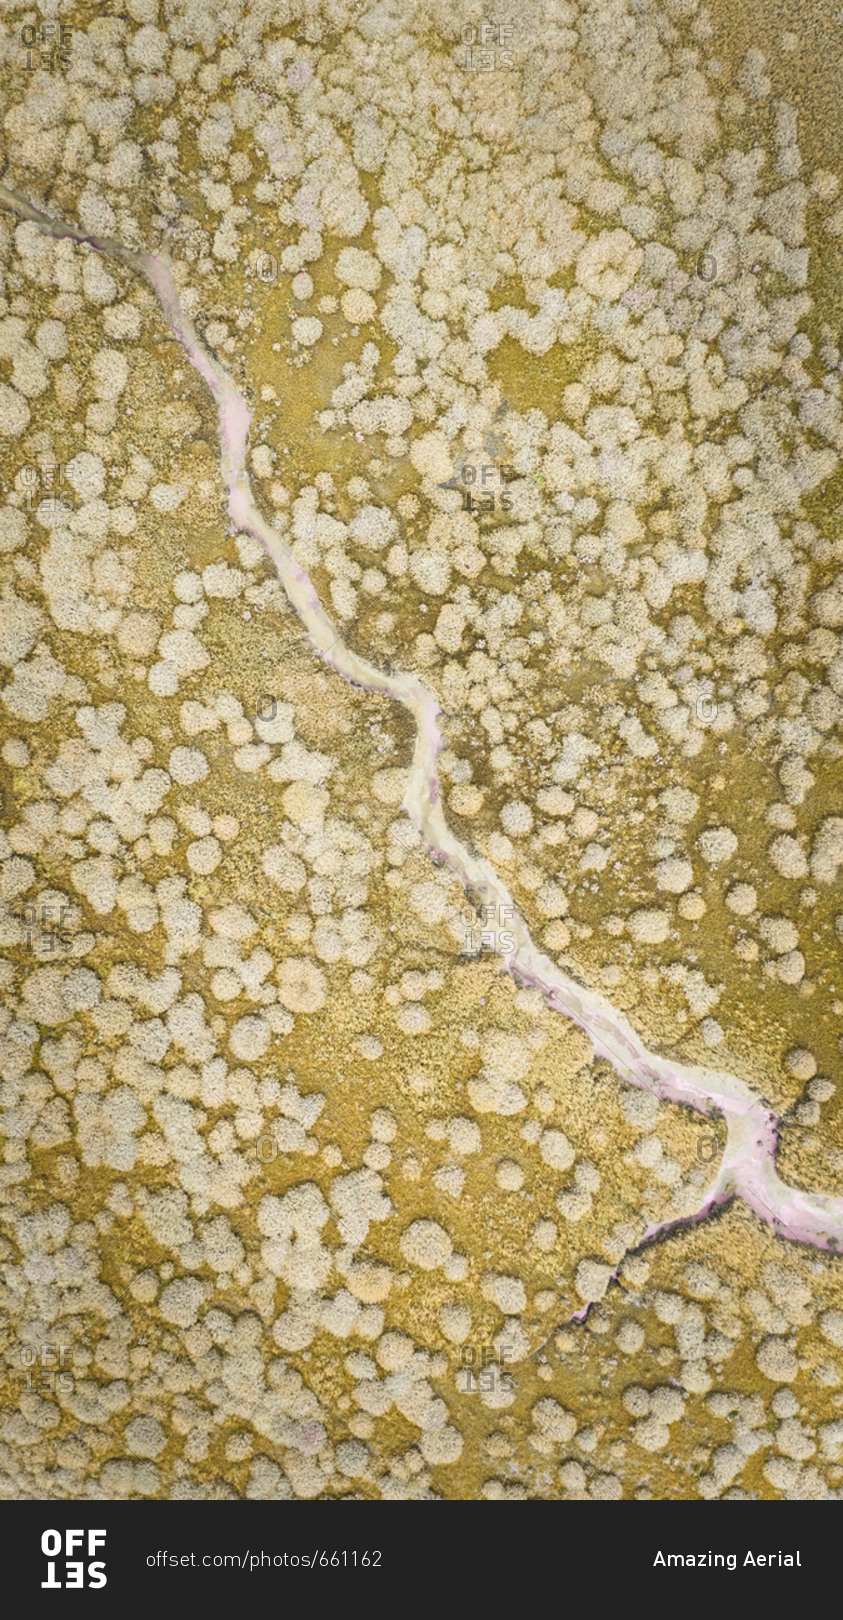 Abstract aerial view of Terschelling wetlands in The Netherlands.